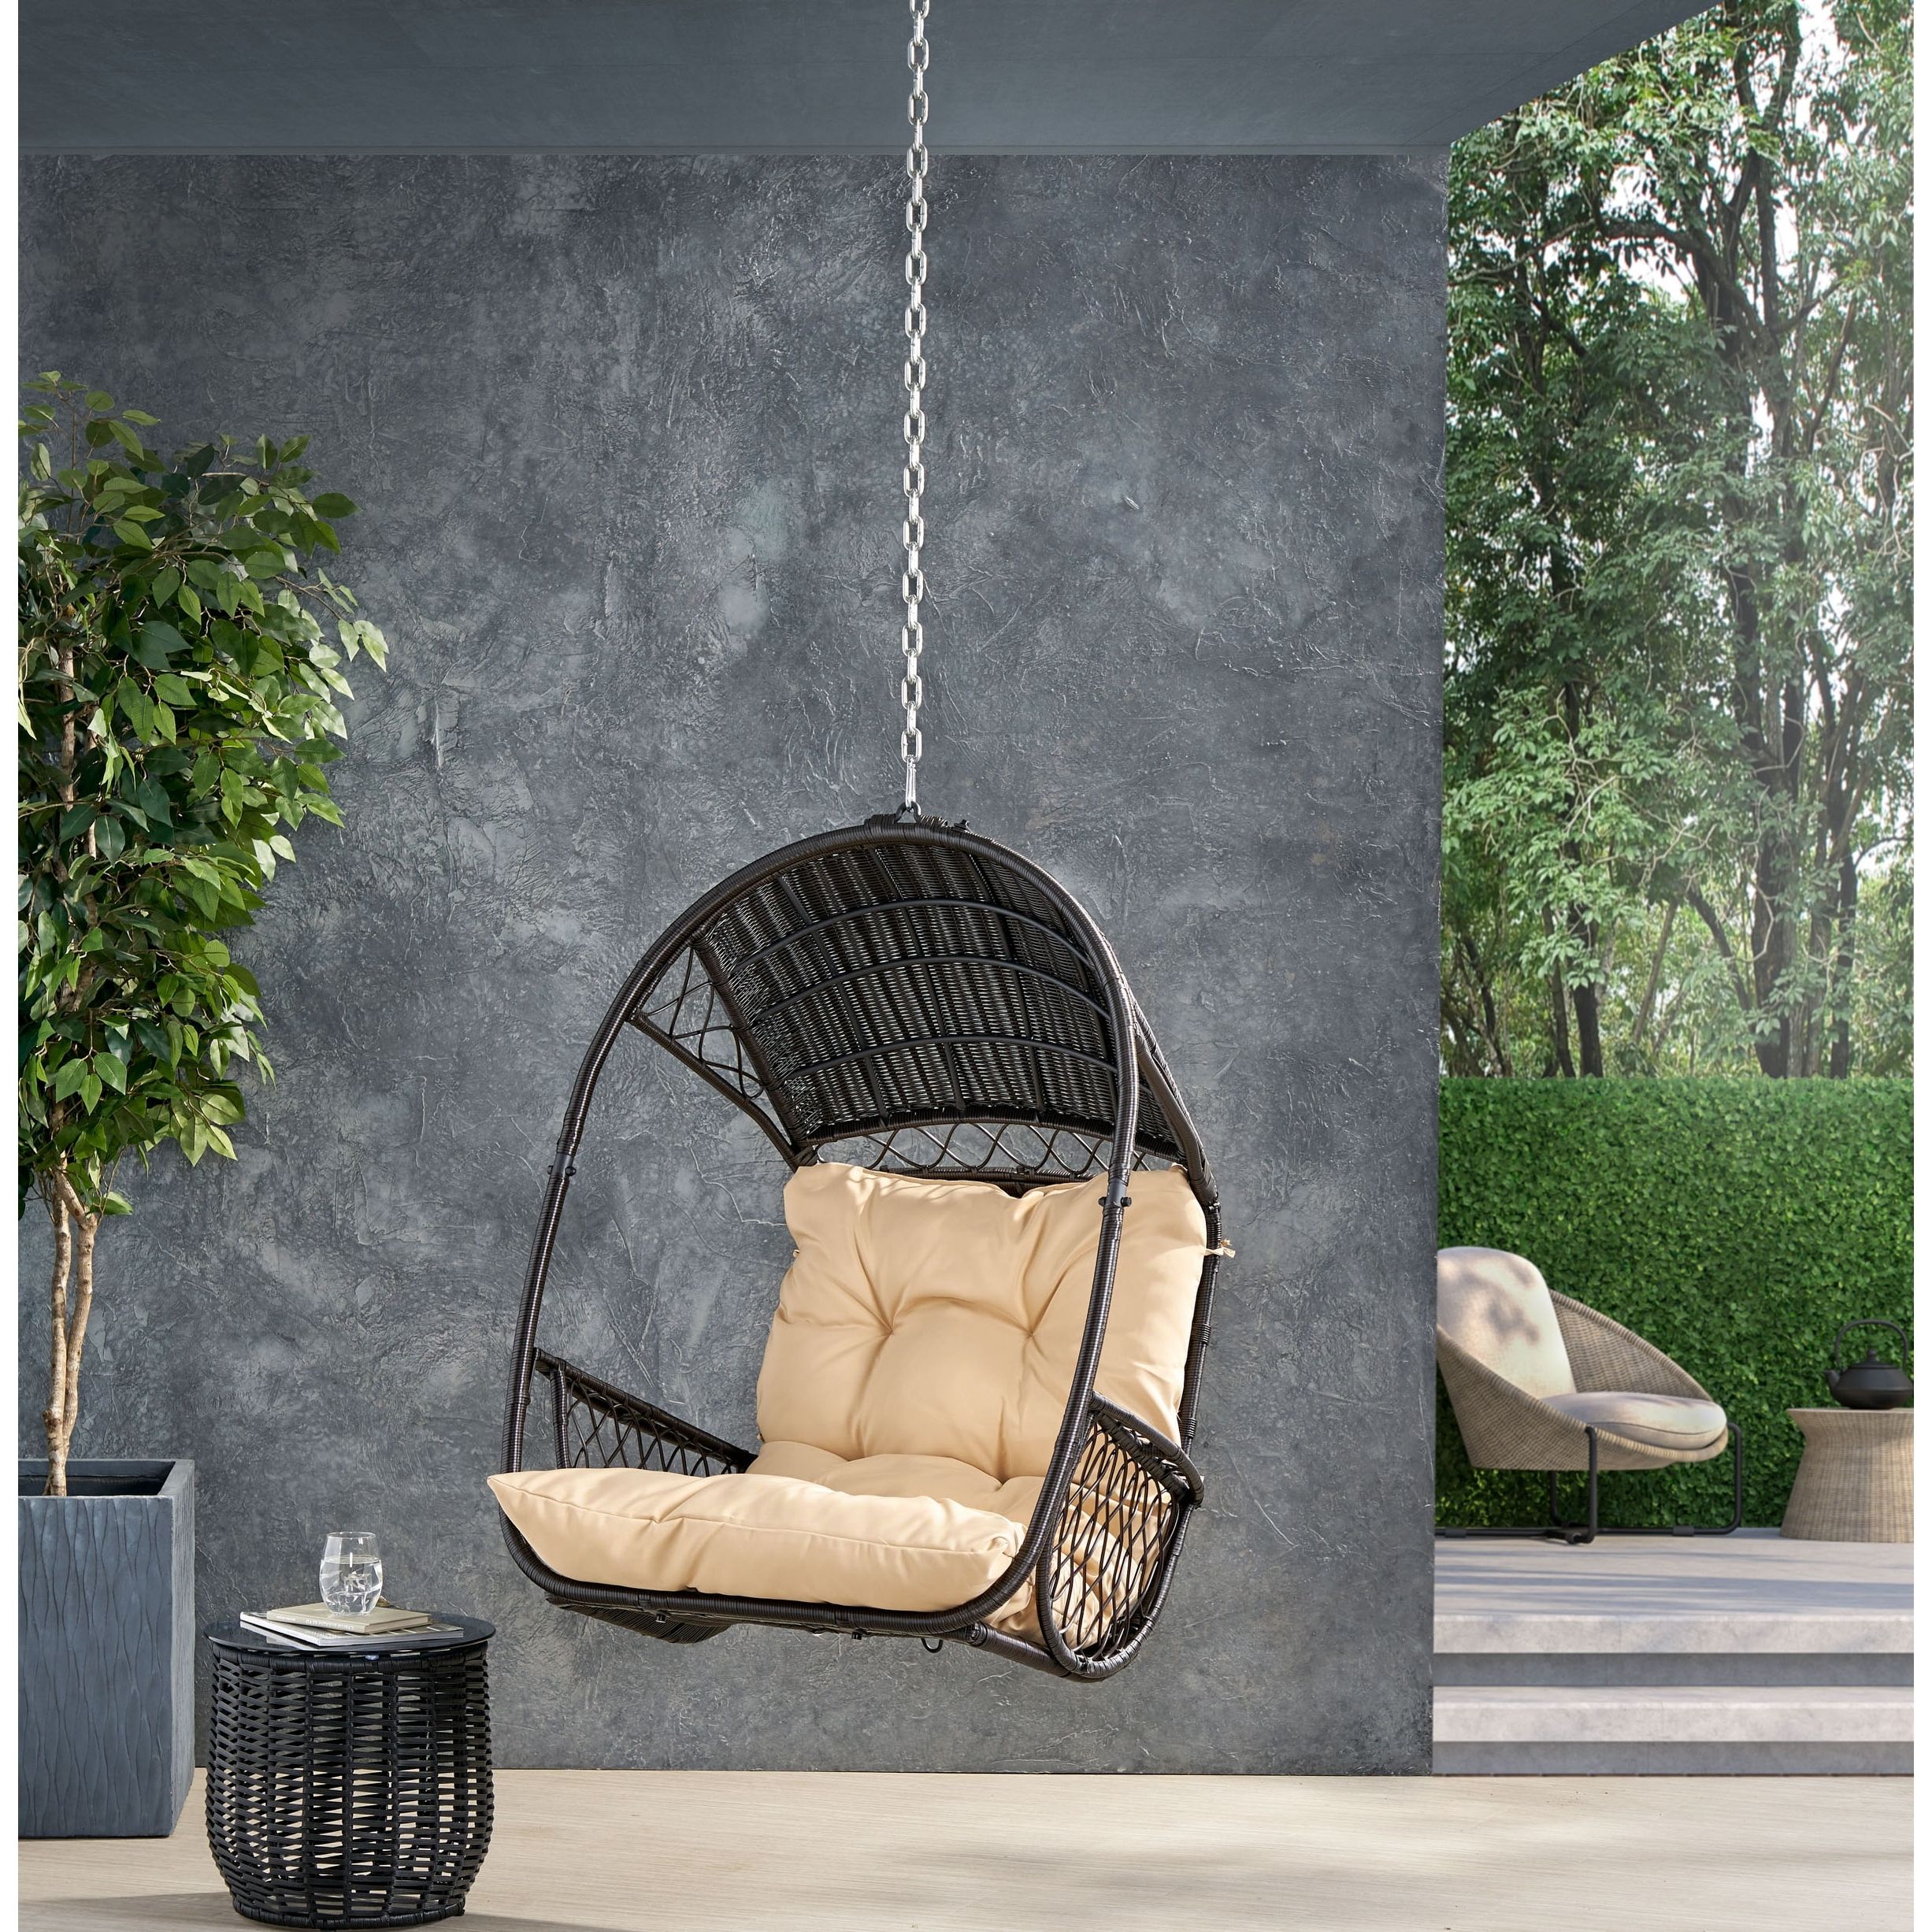 Fashionable Greystone Outdoor/indoor Wicker Hanging Chair W/8 Foot Chainchristopher  Knight Home – On Sale – Overstock – 31825459 With Greystone Plant Stands (View 15 of 15)